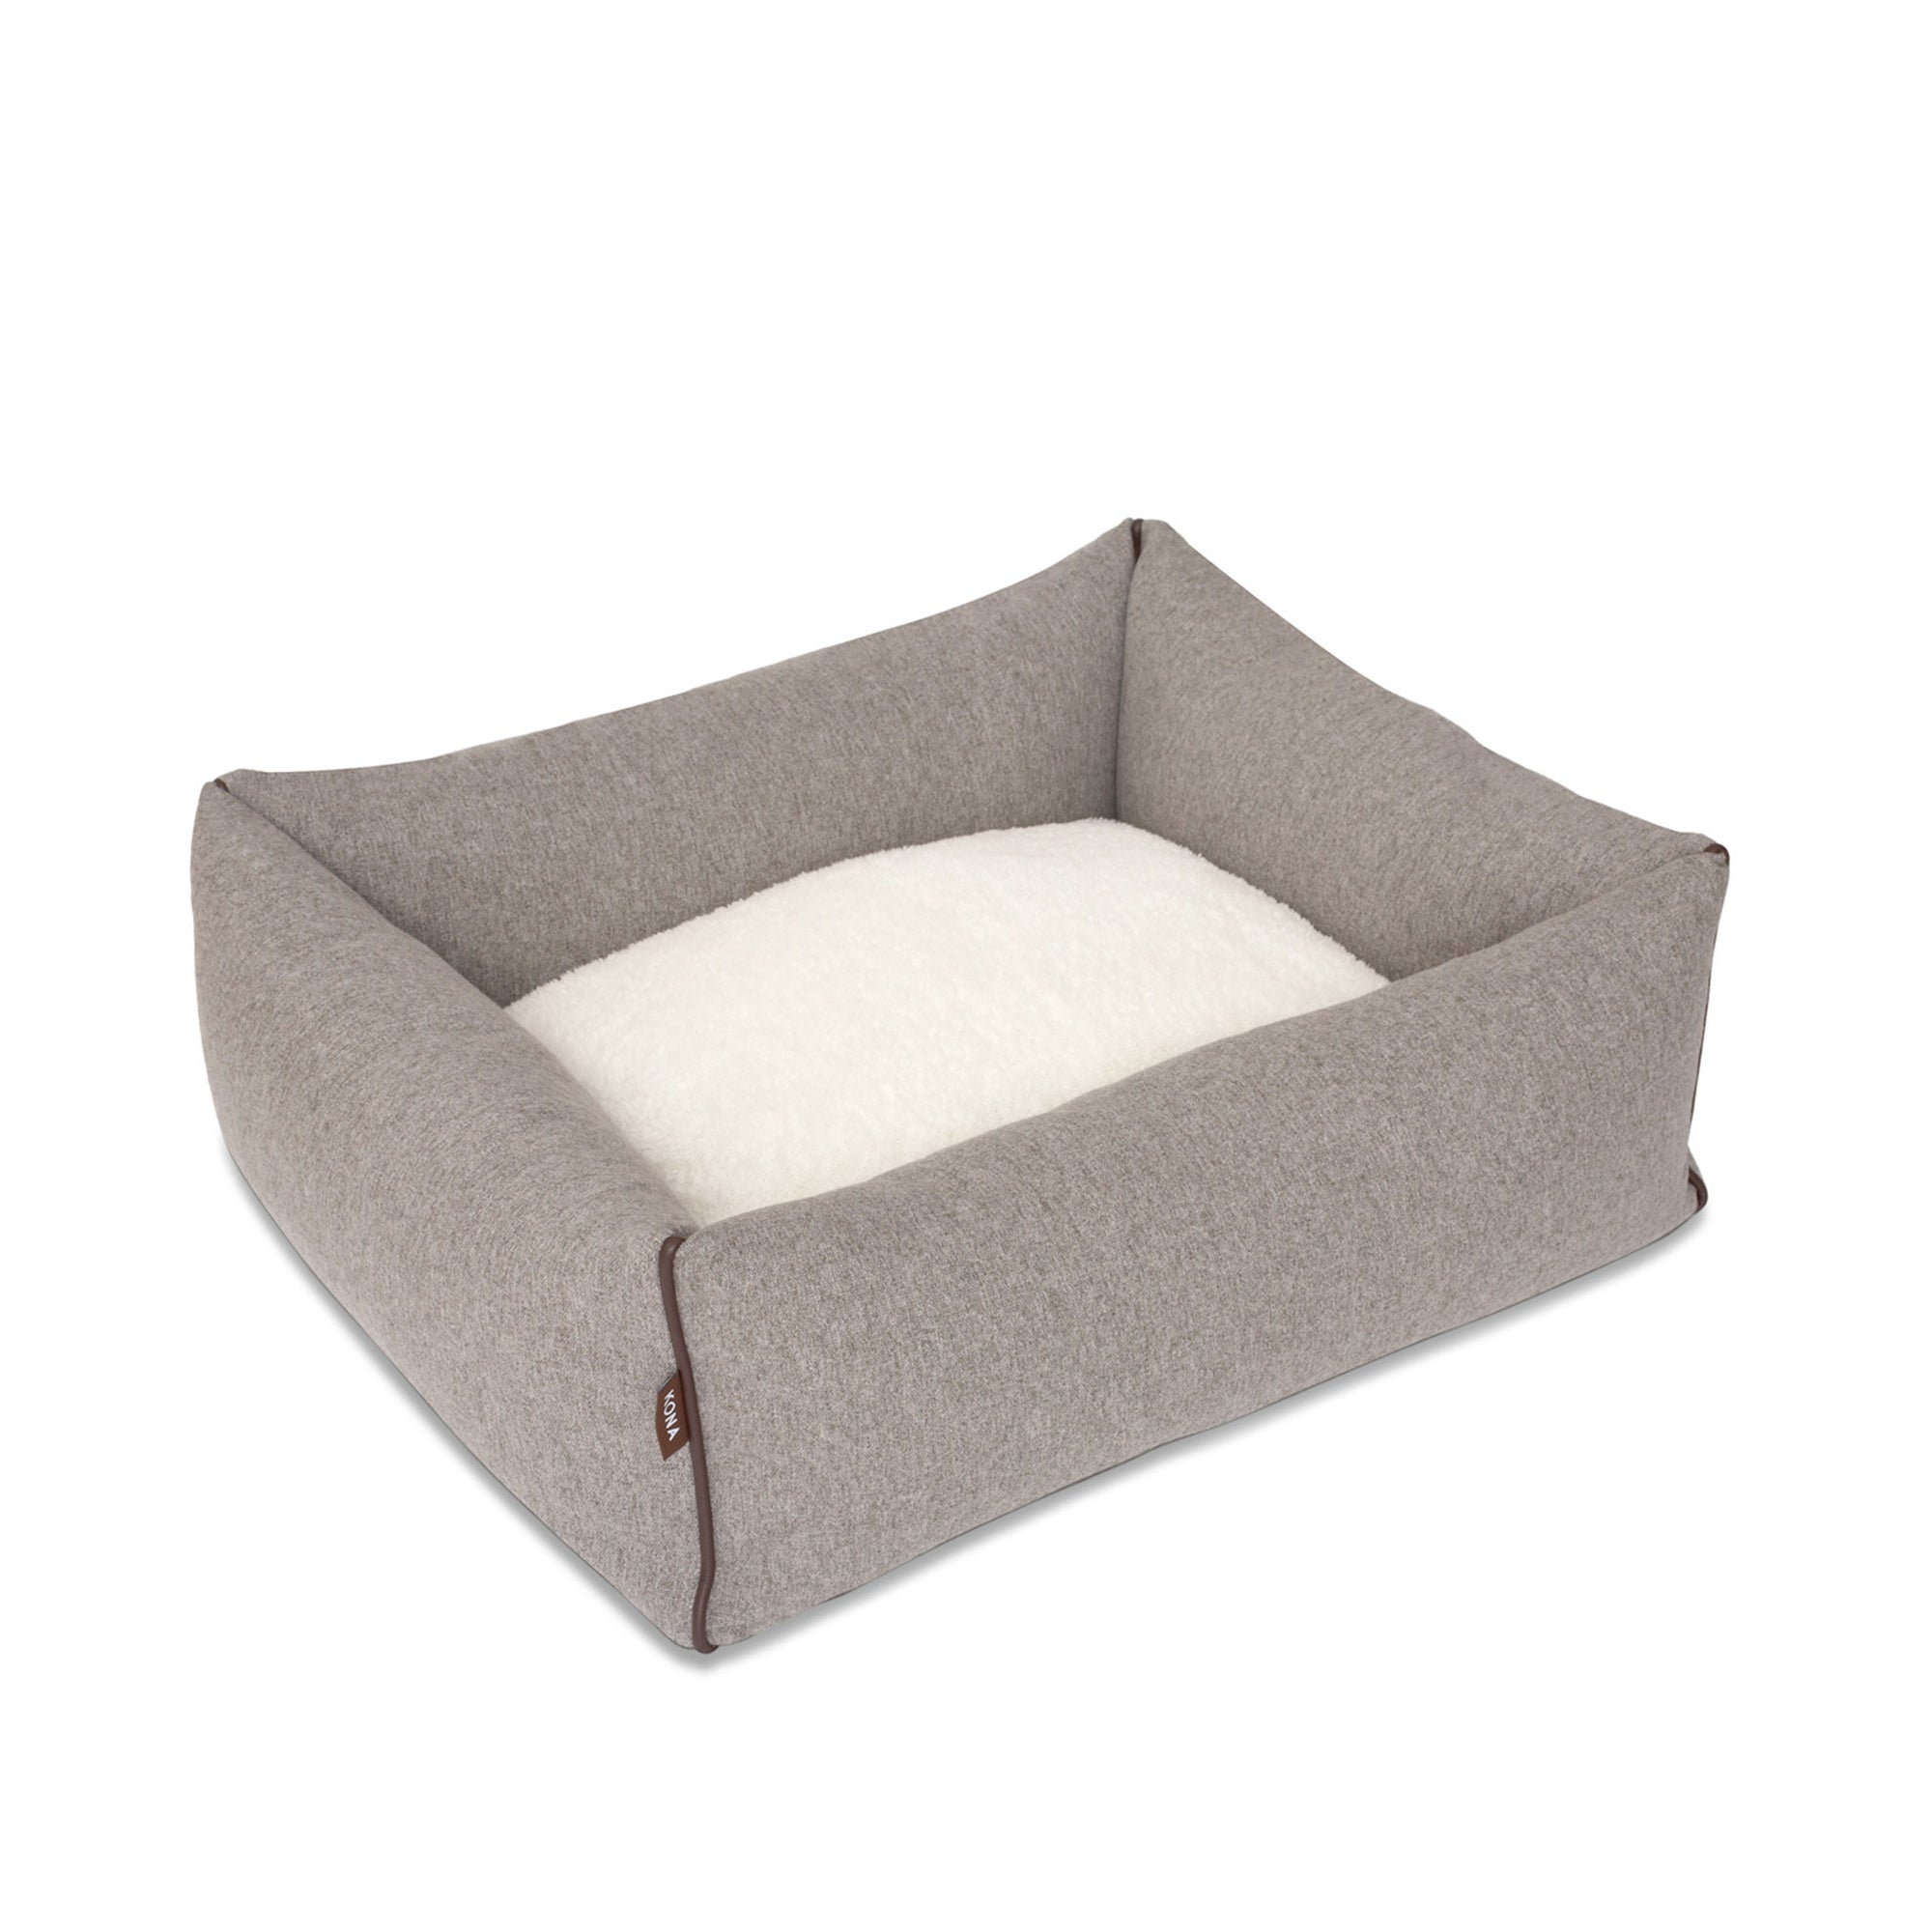 KONA CAVE® luxury bolster dog bed in soft grey flannel fabric with leather trim.